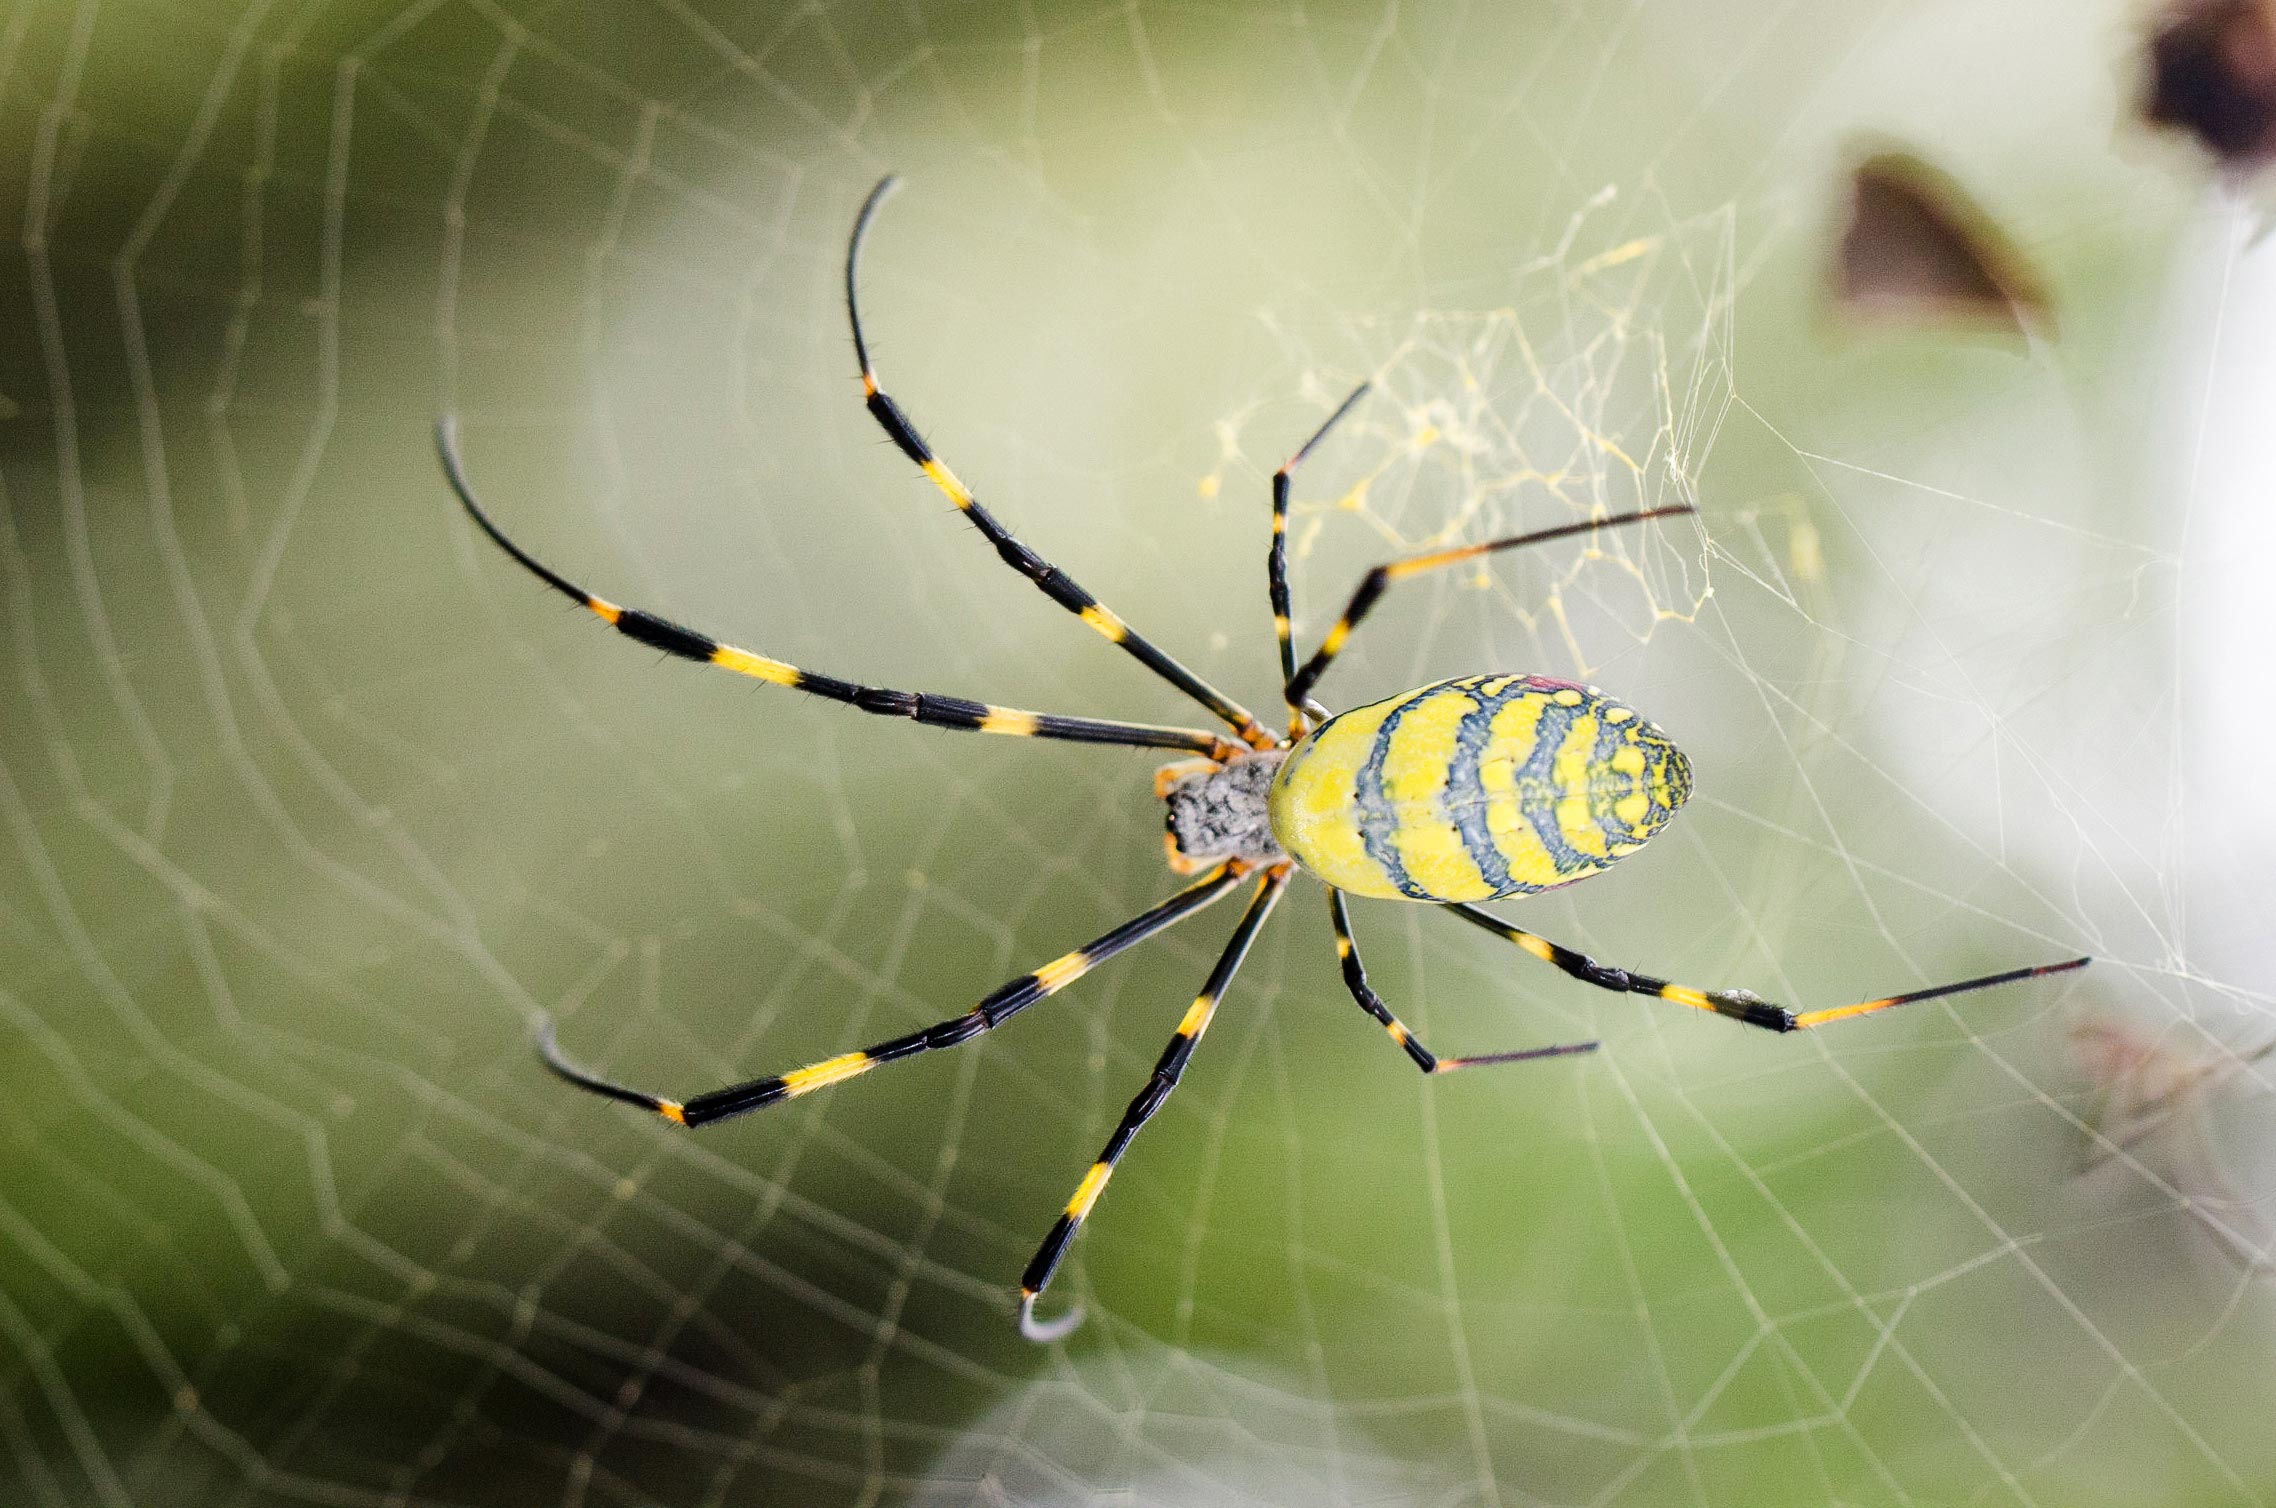 amazingly-strong-and-lightweight-spider-silk-made-by-photosynthetic